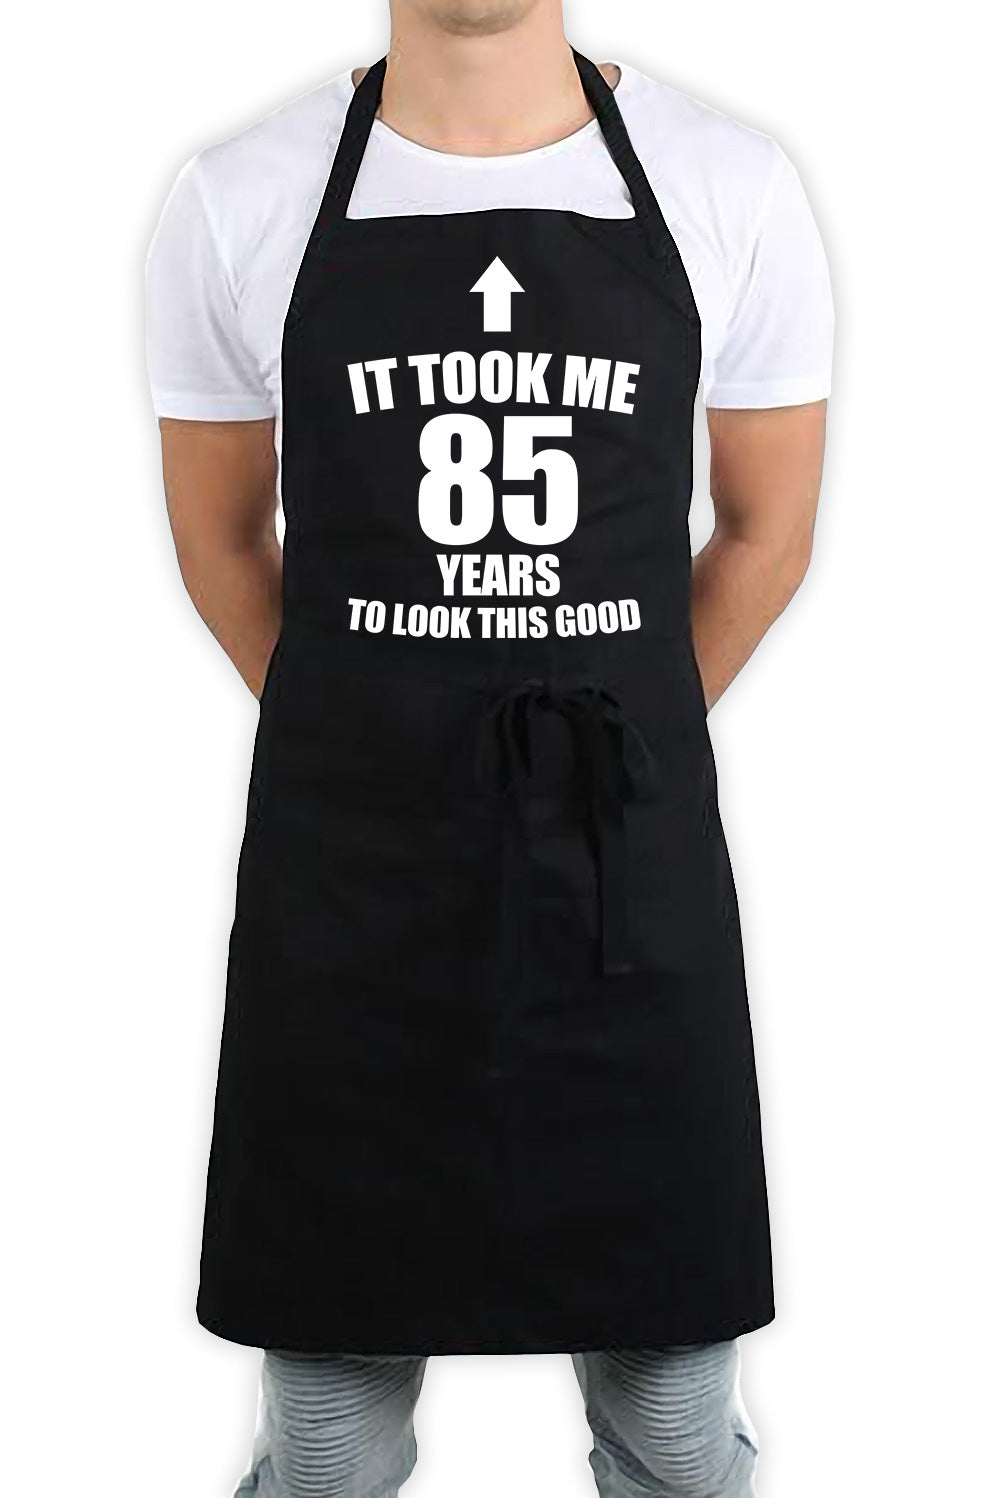 It Took Me 85 Years To Look This Good Funny Kitchen BBQ Apron Black